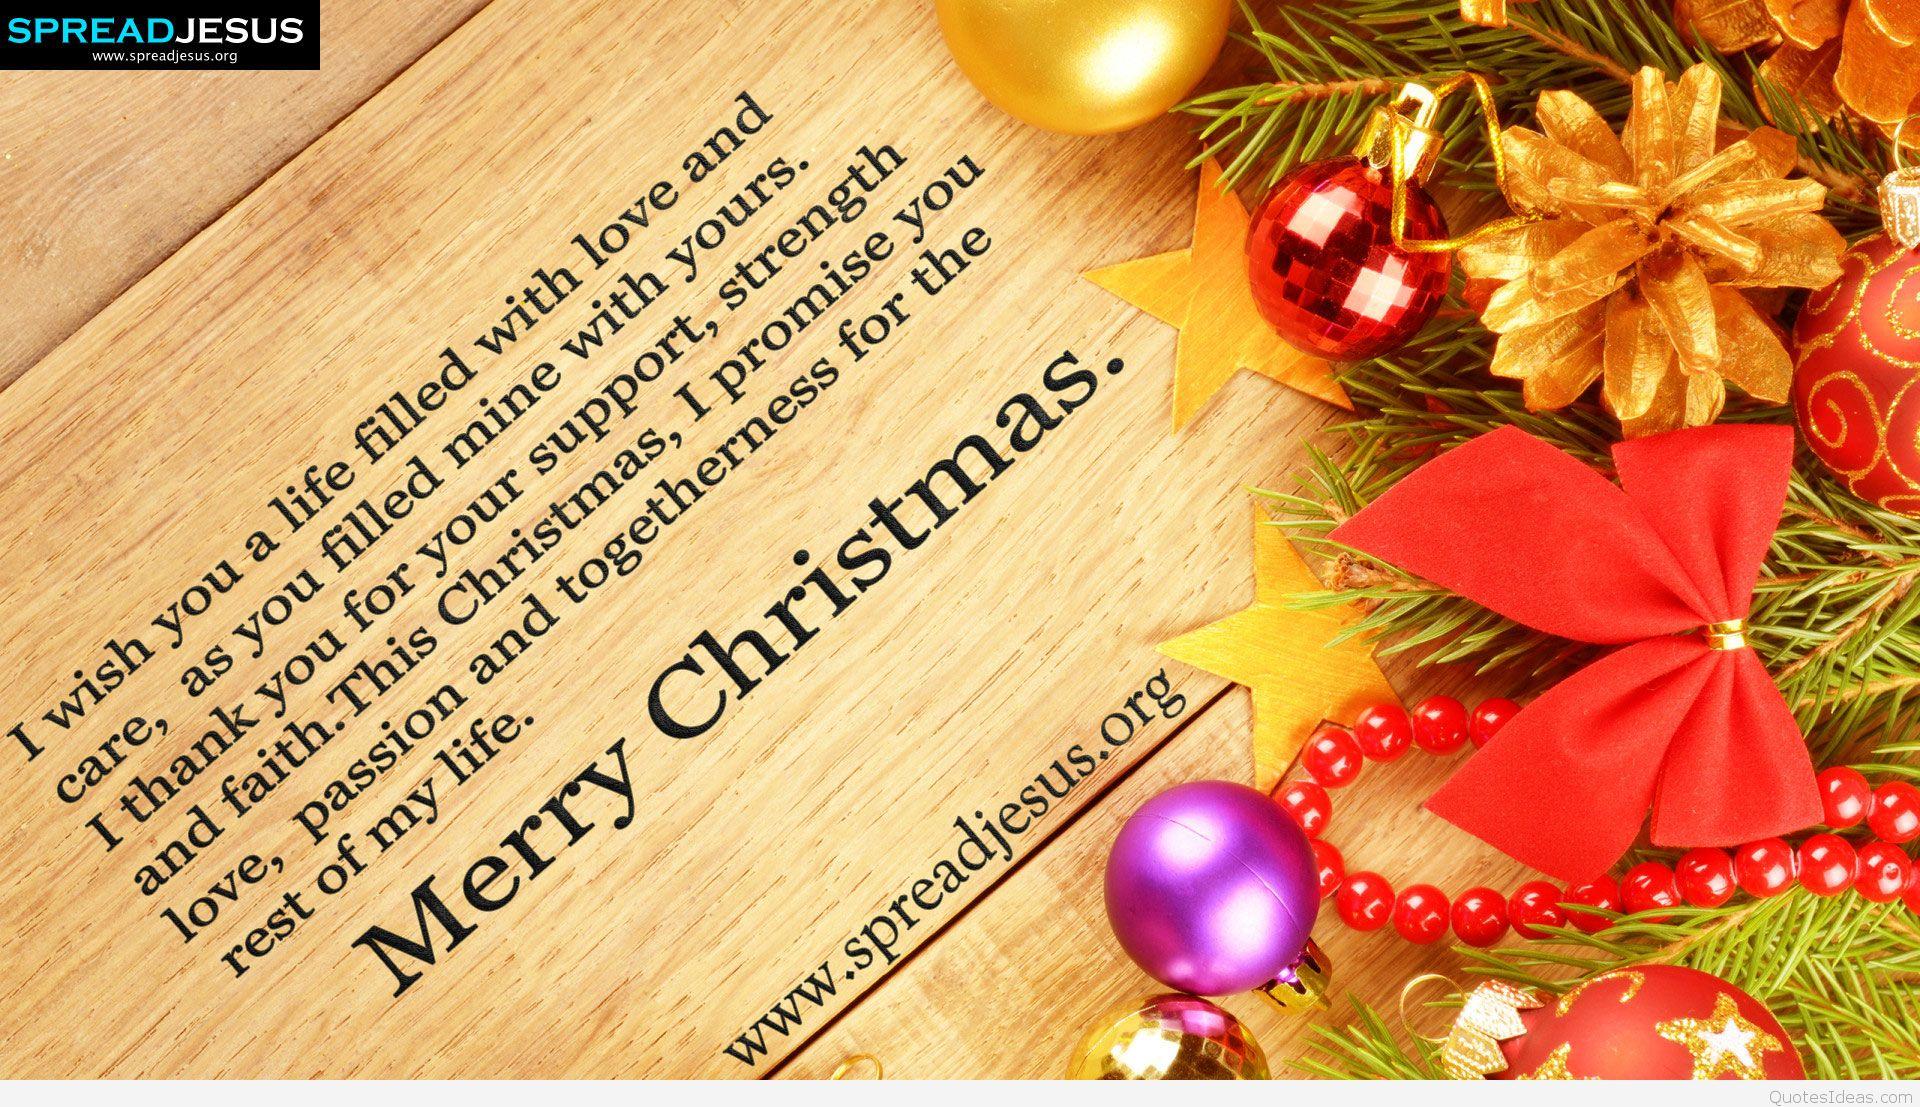 Christmas Greeting HD wallpaper with quote